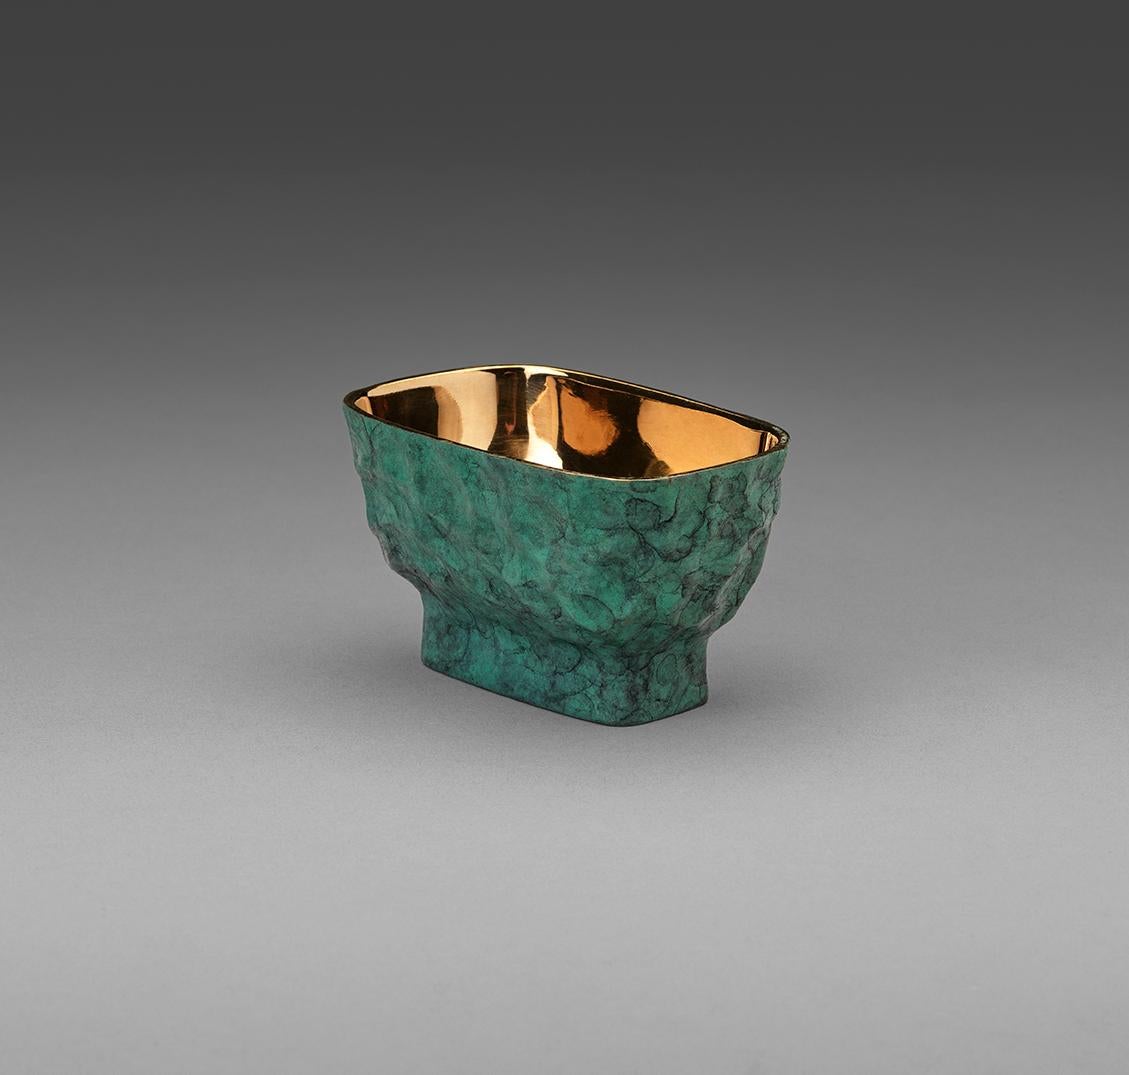 This is a bronze table boat to carry bonbons, salt or pepper. Cast using lost wax method the inner bowl is highly polished to a mirror finish. The hand-wrought exterior has a beautiful Verdigris patina and gives a stunning contrast. This table boat